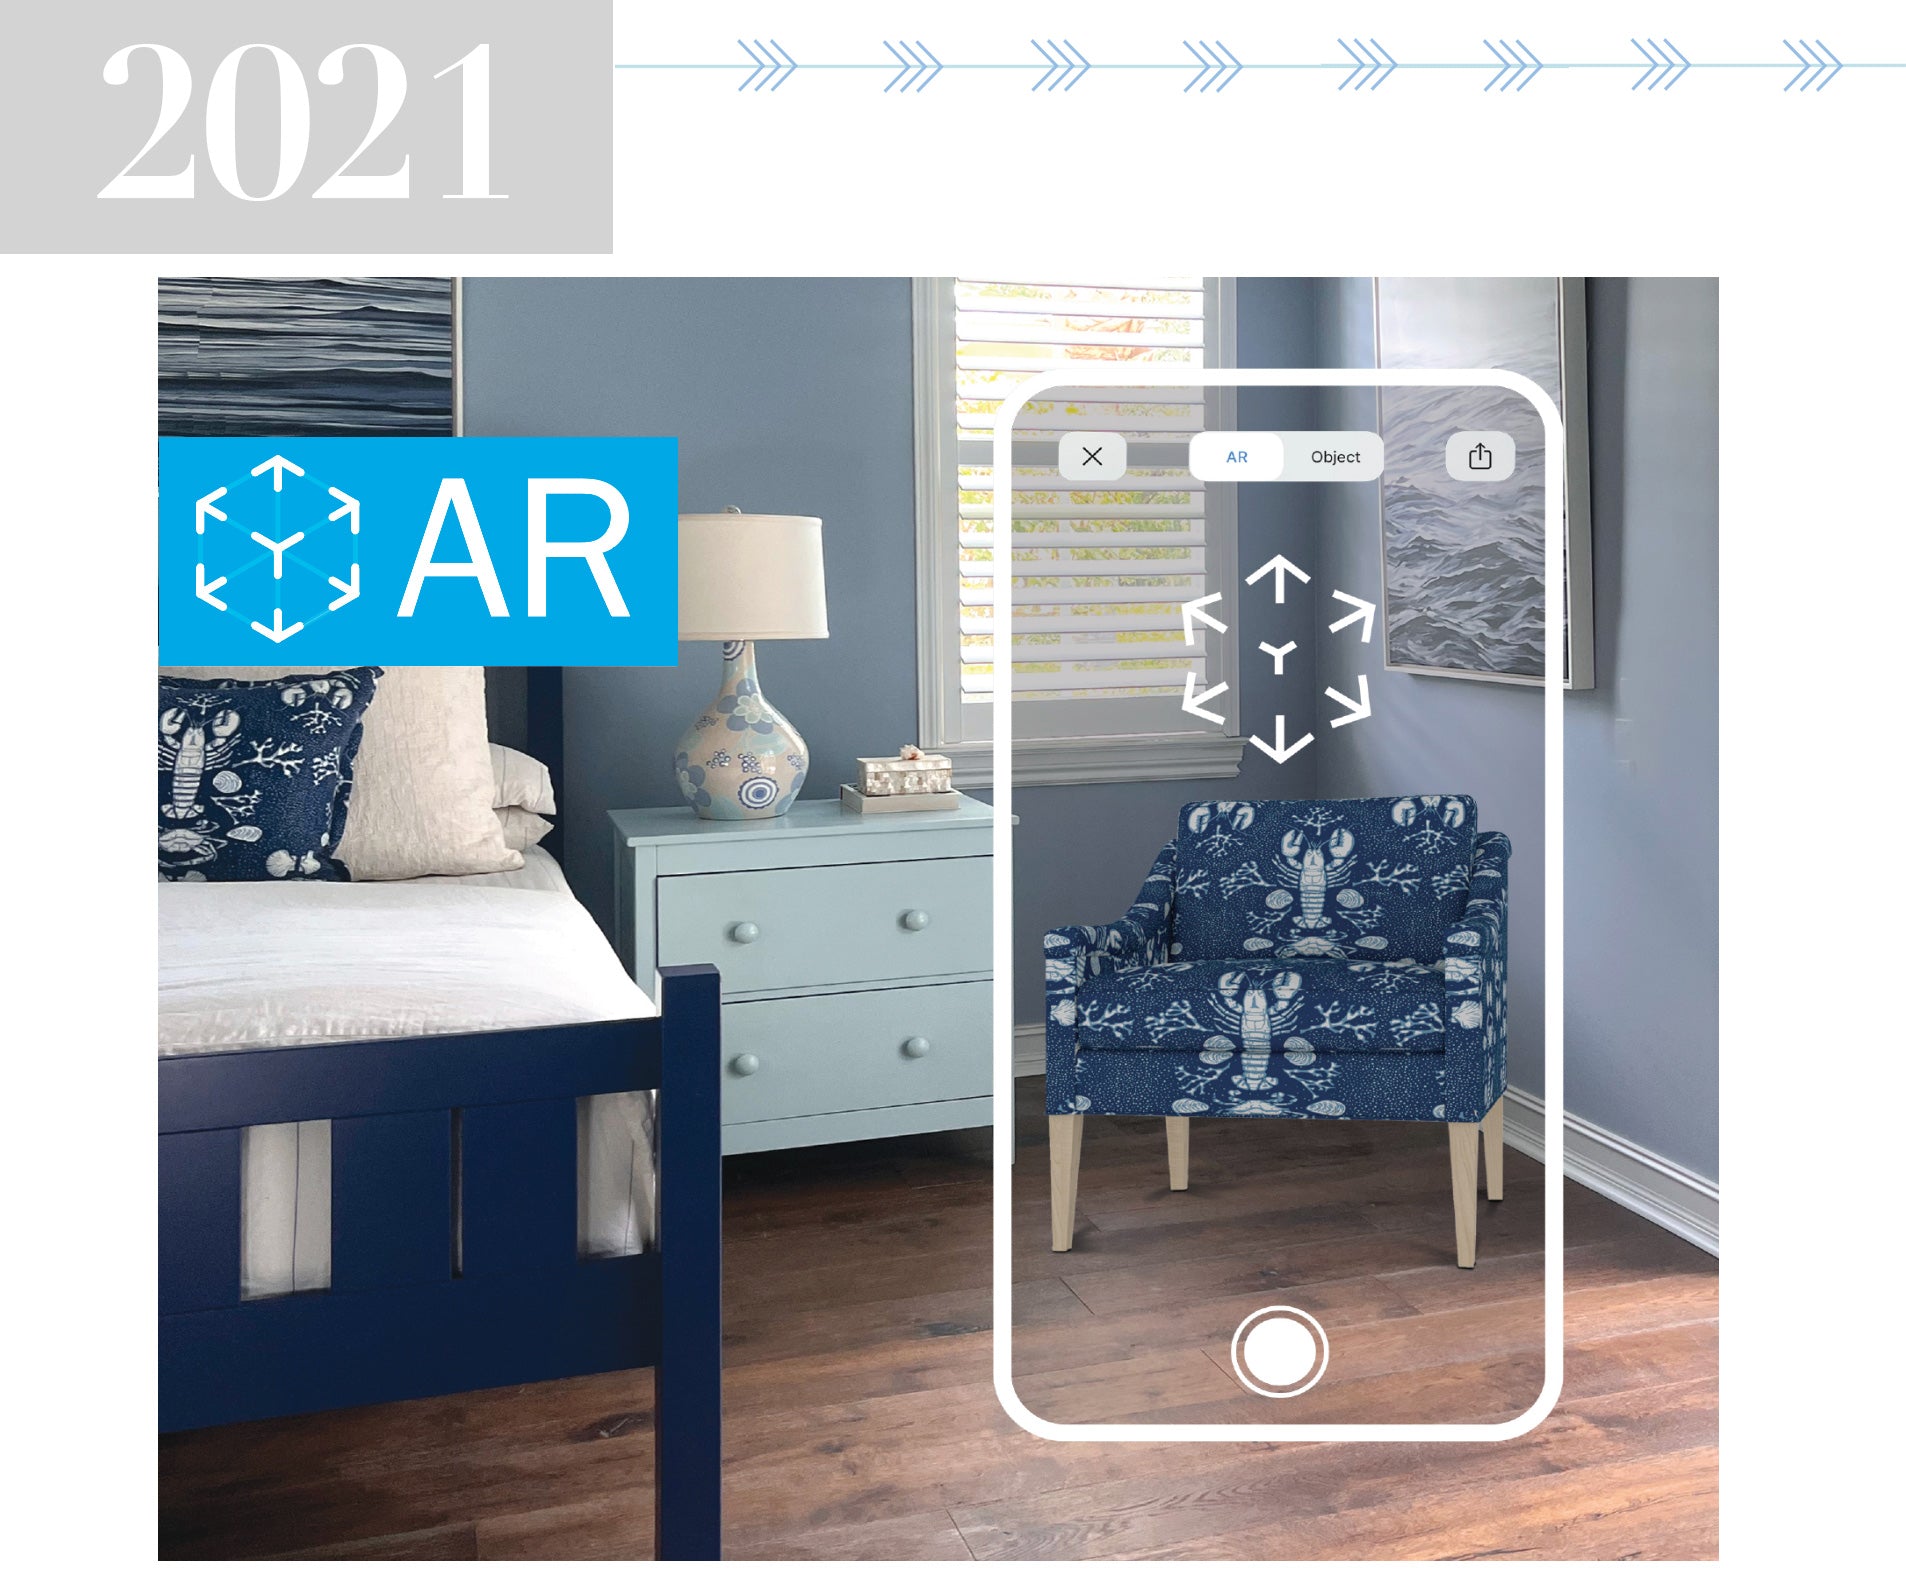 Going Digital with Augmented Reality